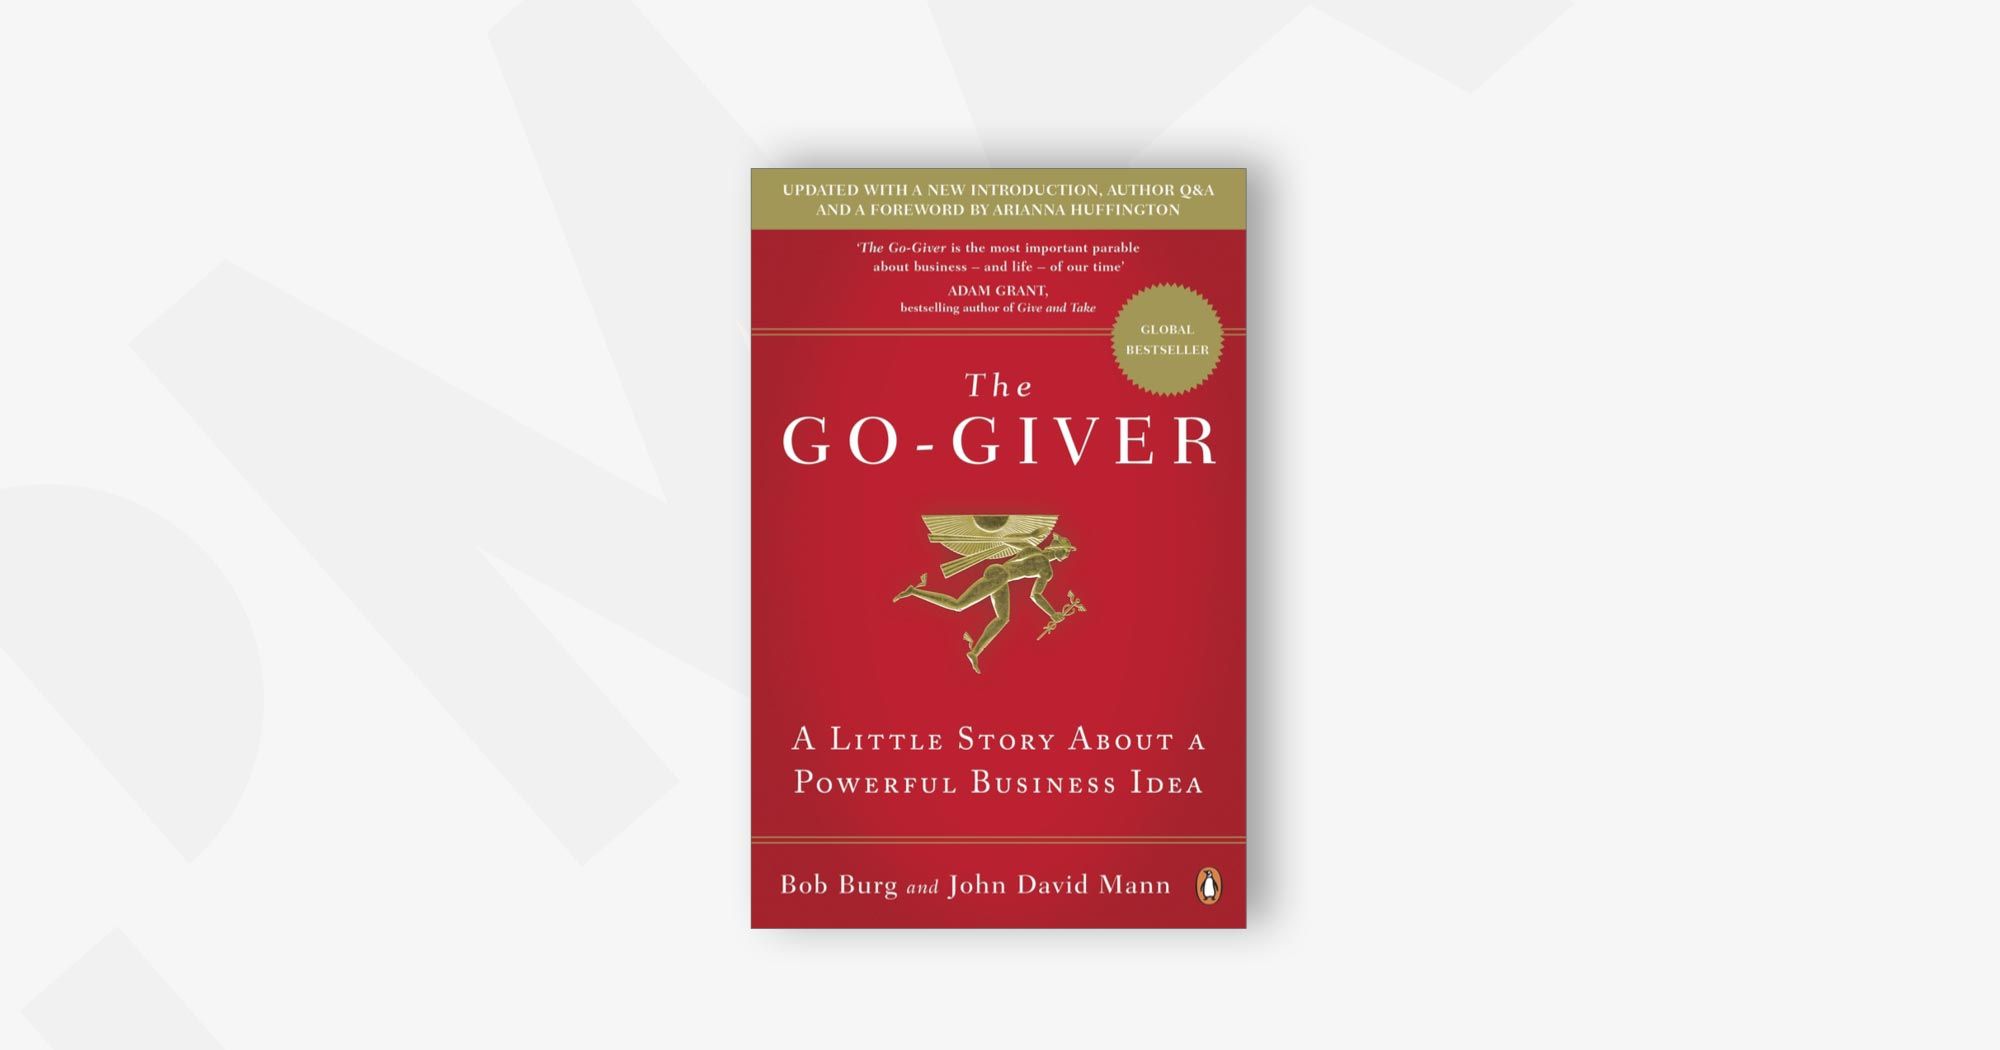 The Go-Giver Influencer: A Little Story About a Powerful Business Idea – Bob Burg and John D. Mann